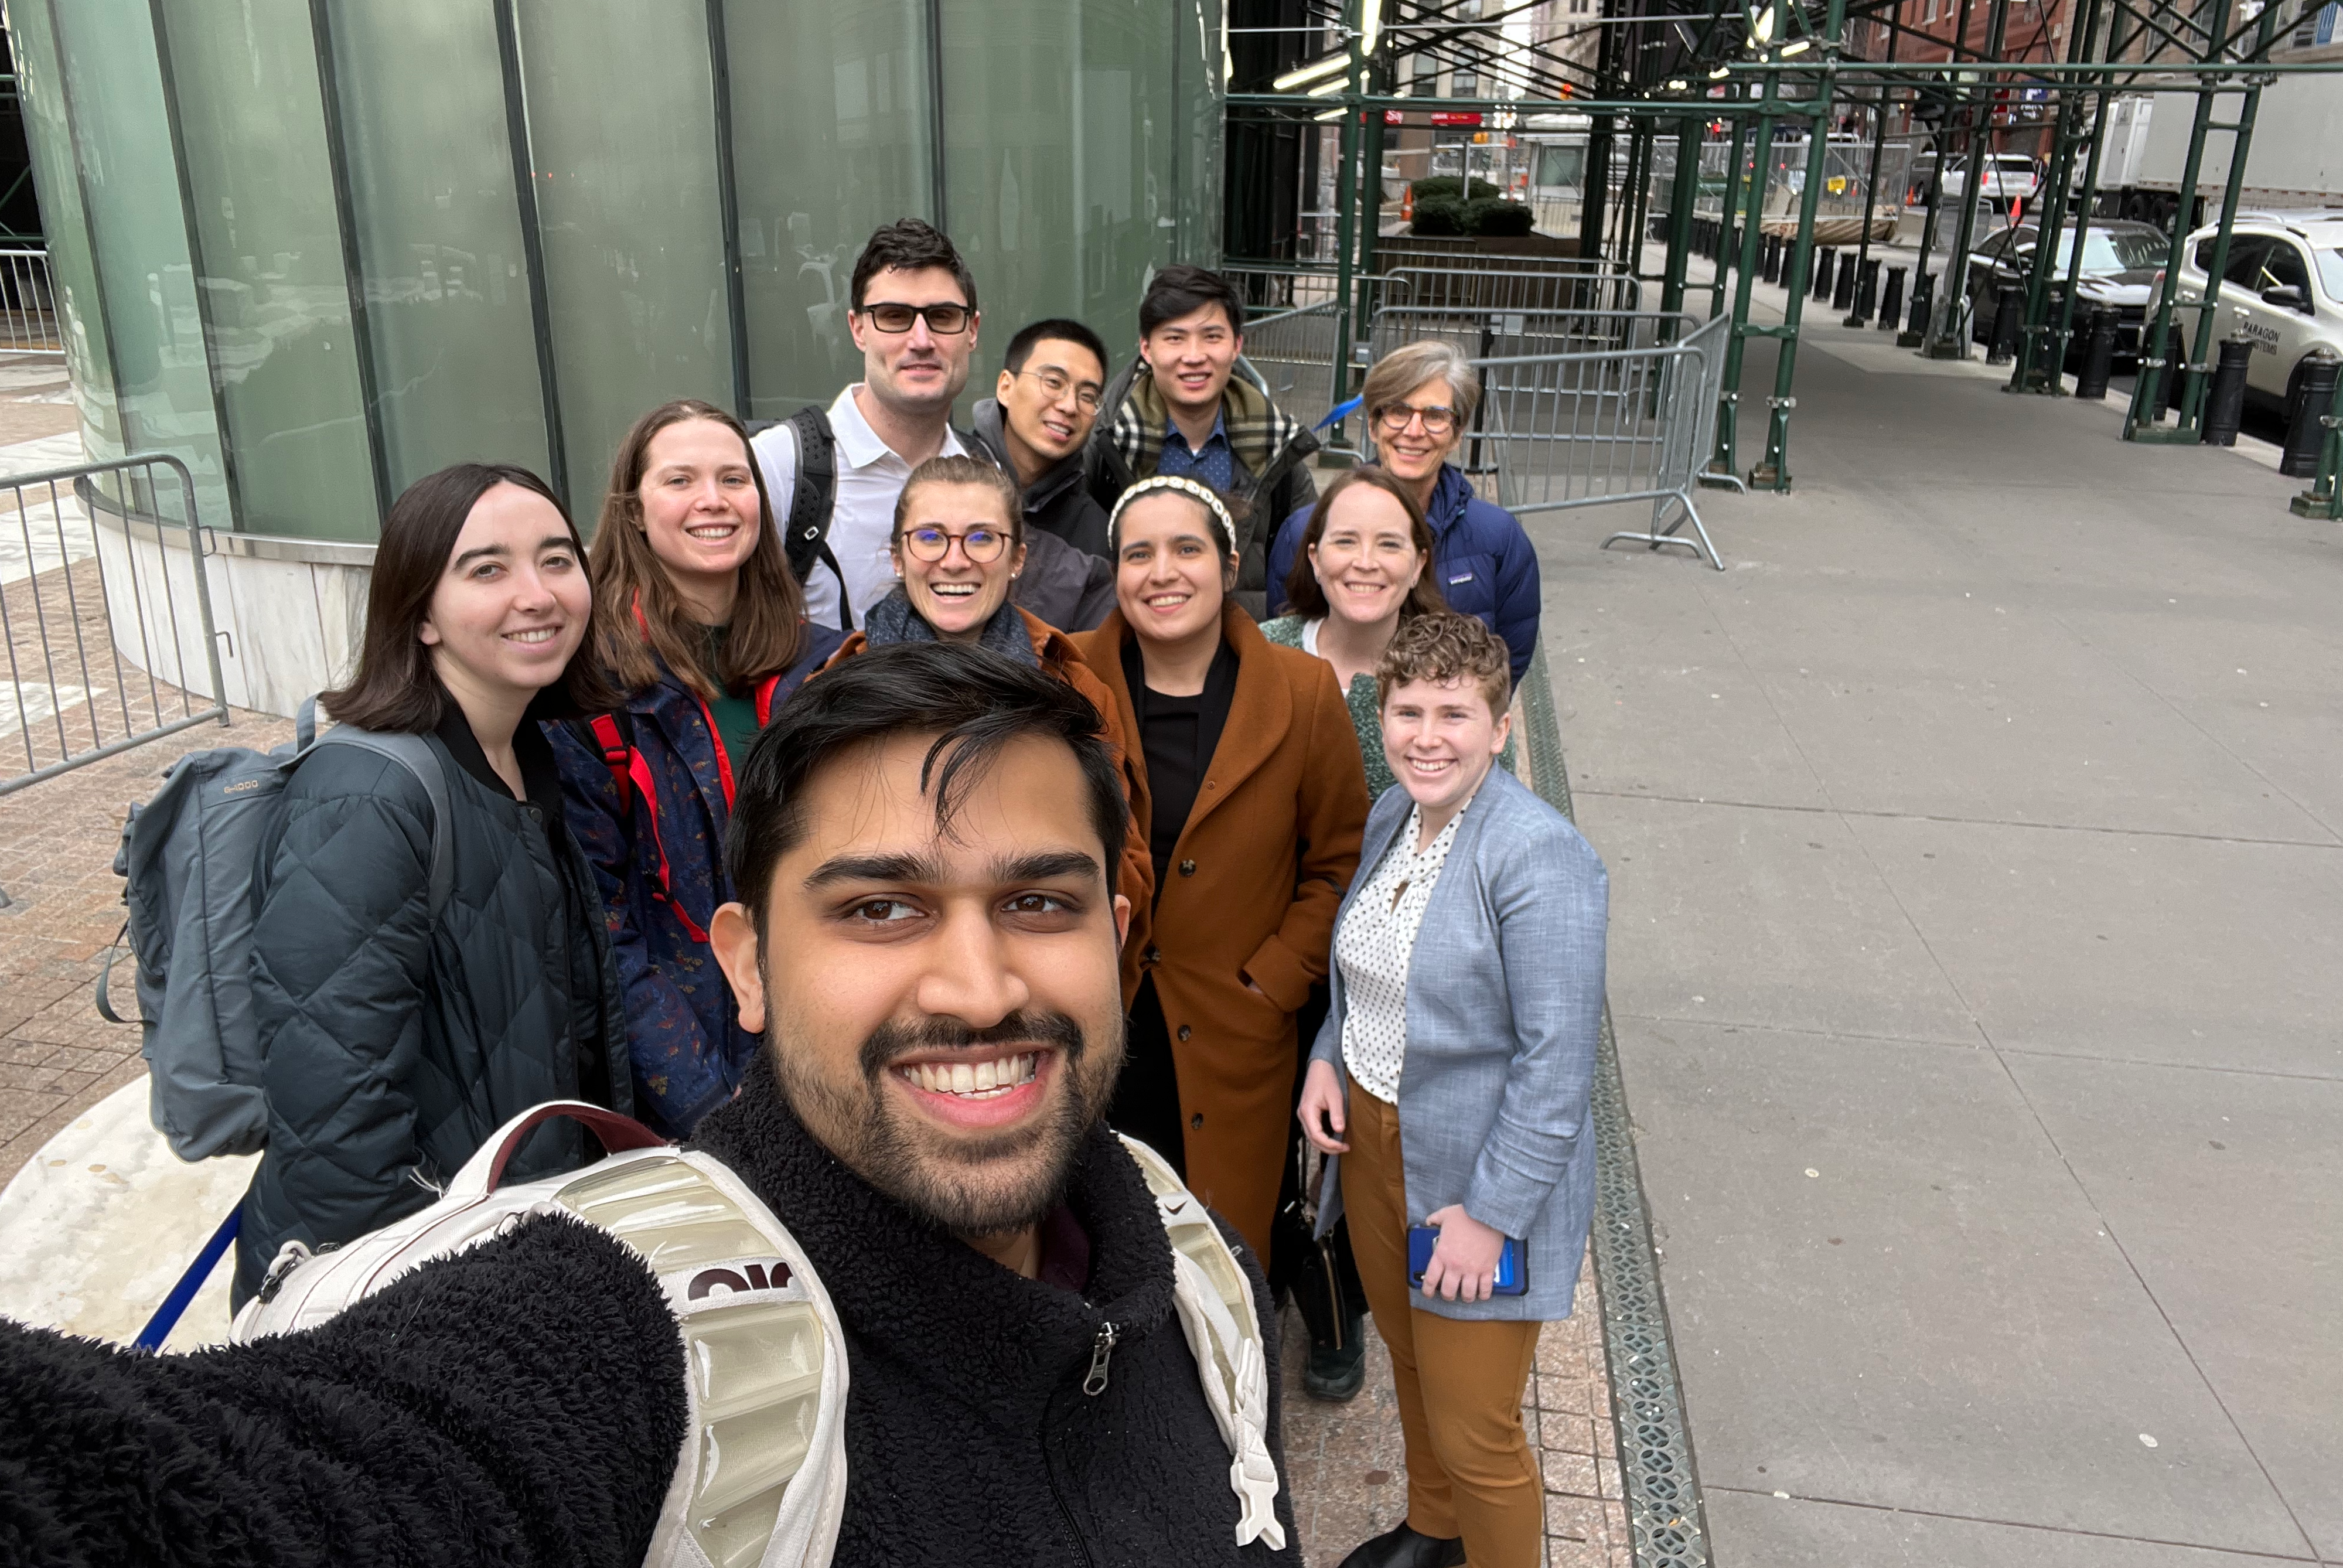 a selfie photo of a group of Cornell Law students who are outside in a group on the streets of New York City. They are all looking up at the camera and smiling. The side of a green building is behind them.